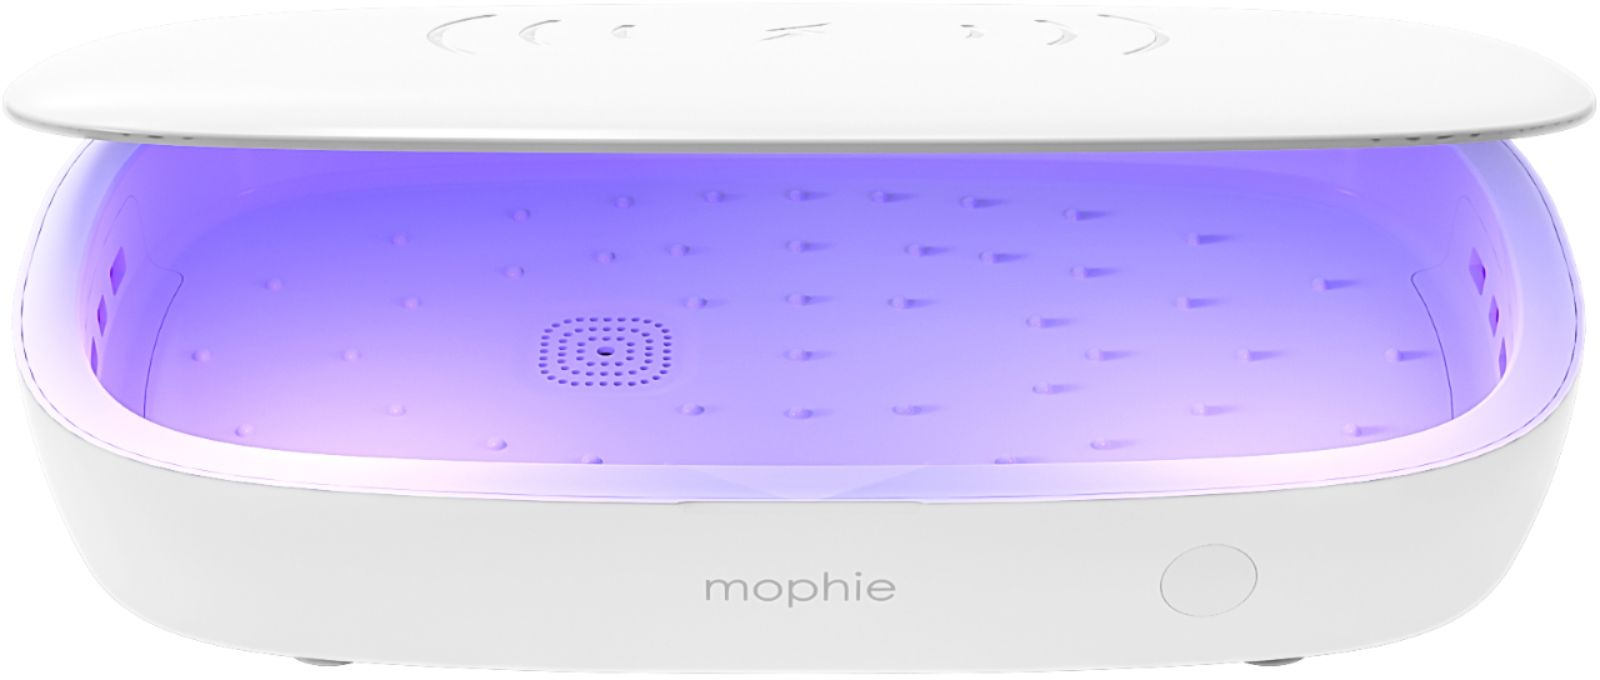 Mophie UV Sanitizer with Wireless Charging